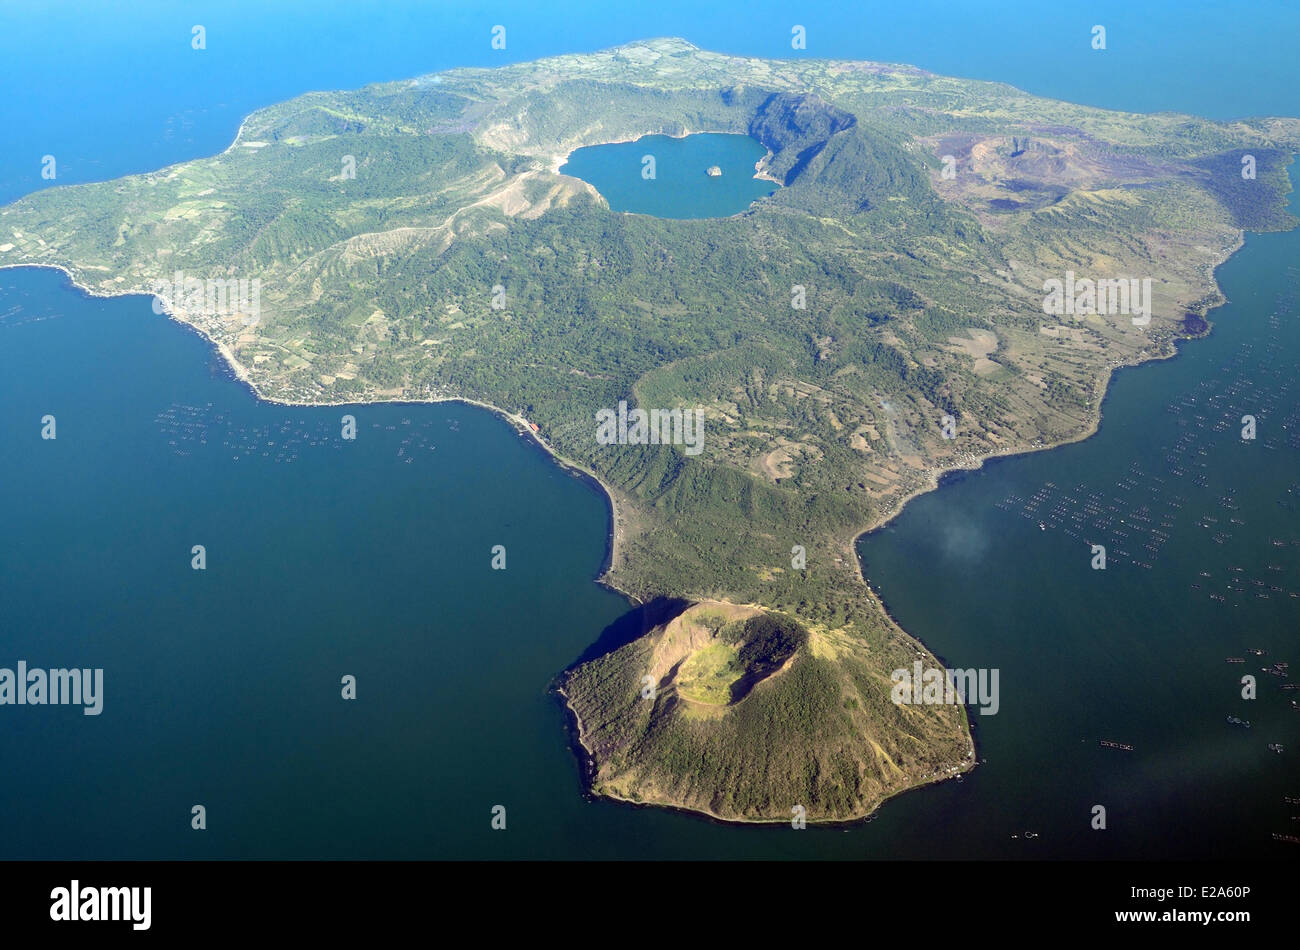 Philippines, Luzon island, the island and the vulcano of Taal surrounded by Taal lake (aerial view) Stock Photo